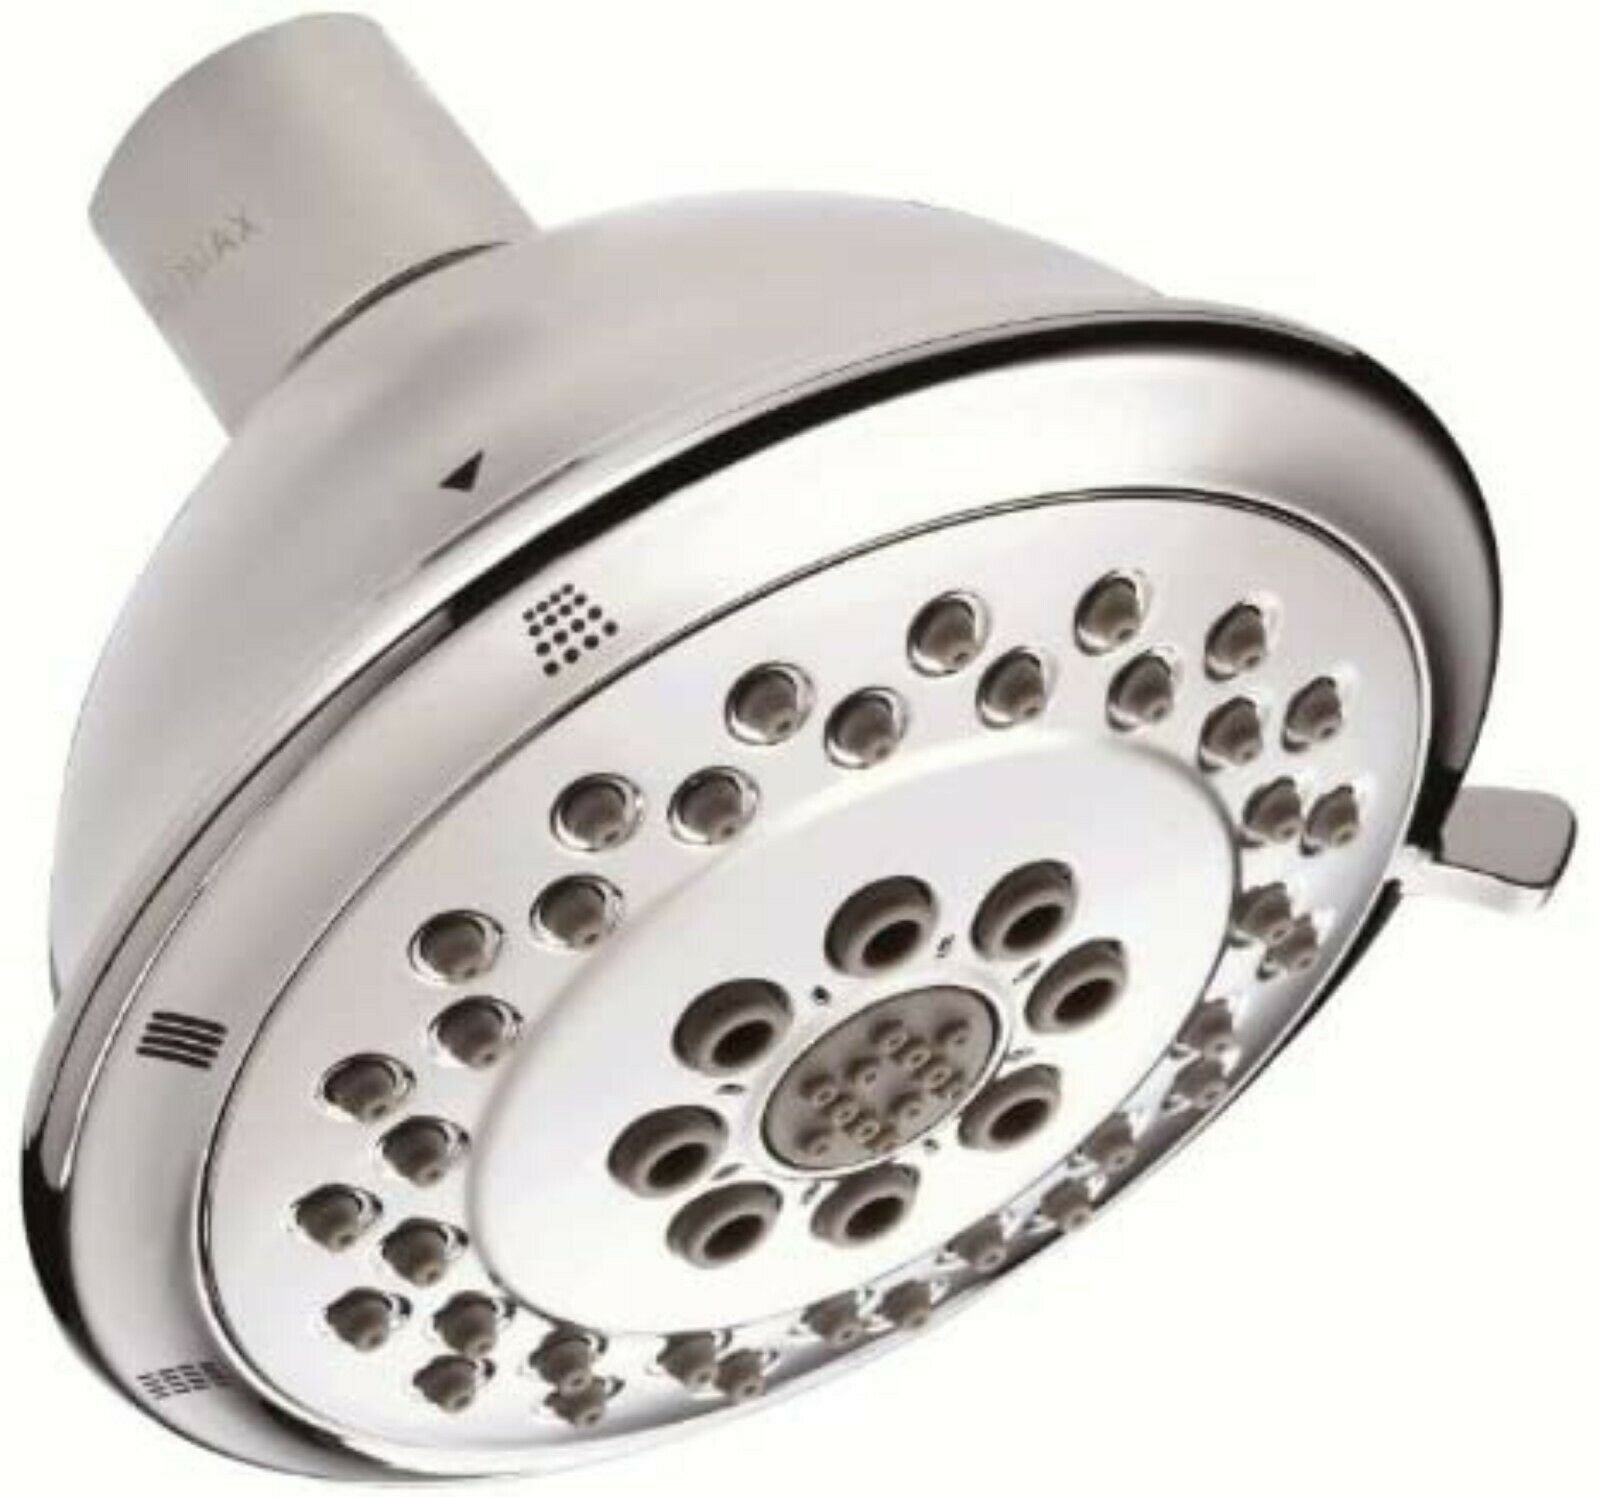 Primary image for Danze Water Saver Chrome Shower Head D460047 513E 4" Three Function